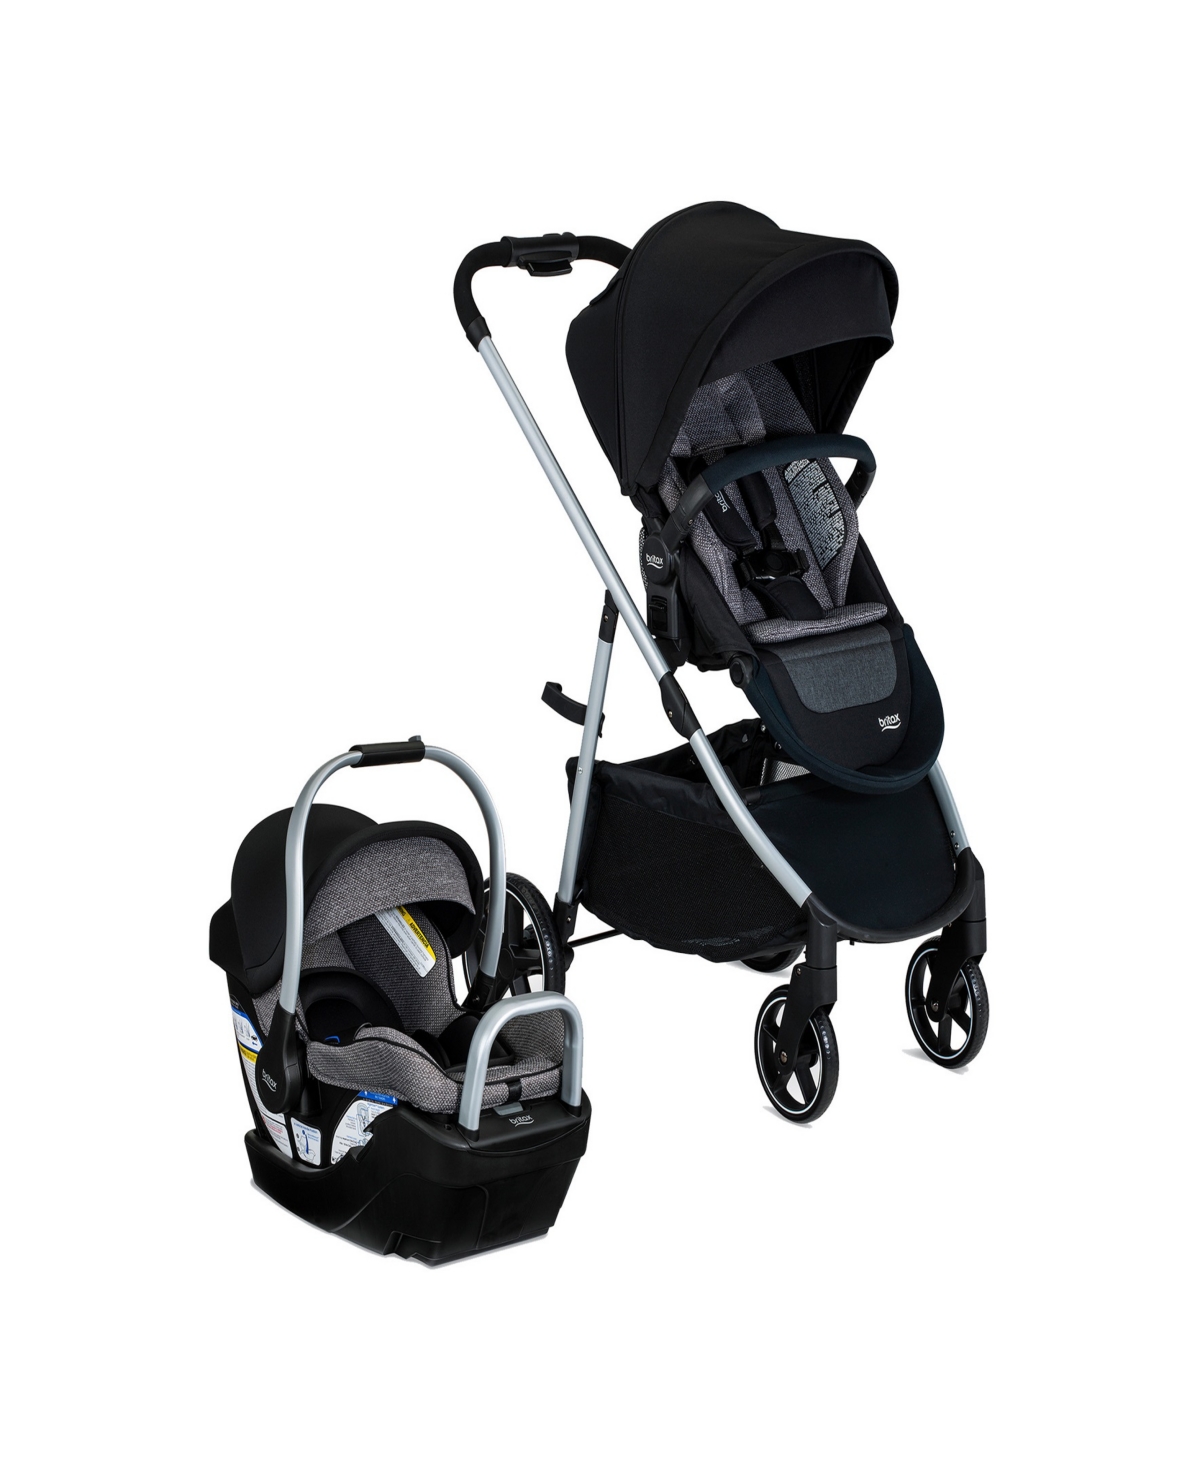 Britax Babies' Willow Grove Sc Travel System In Black